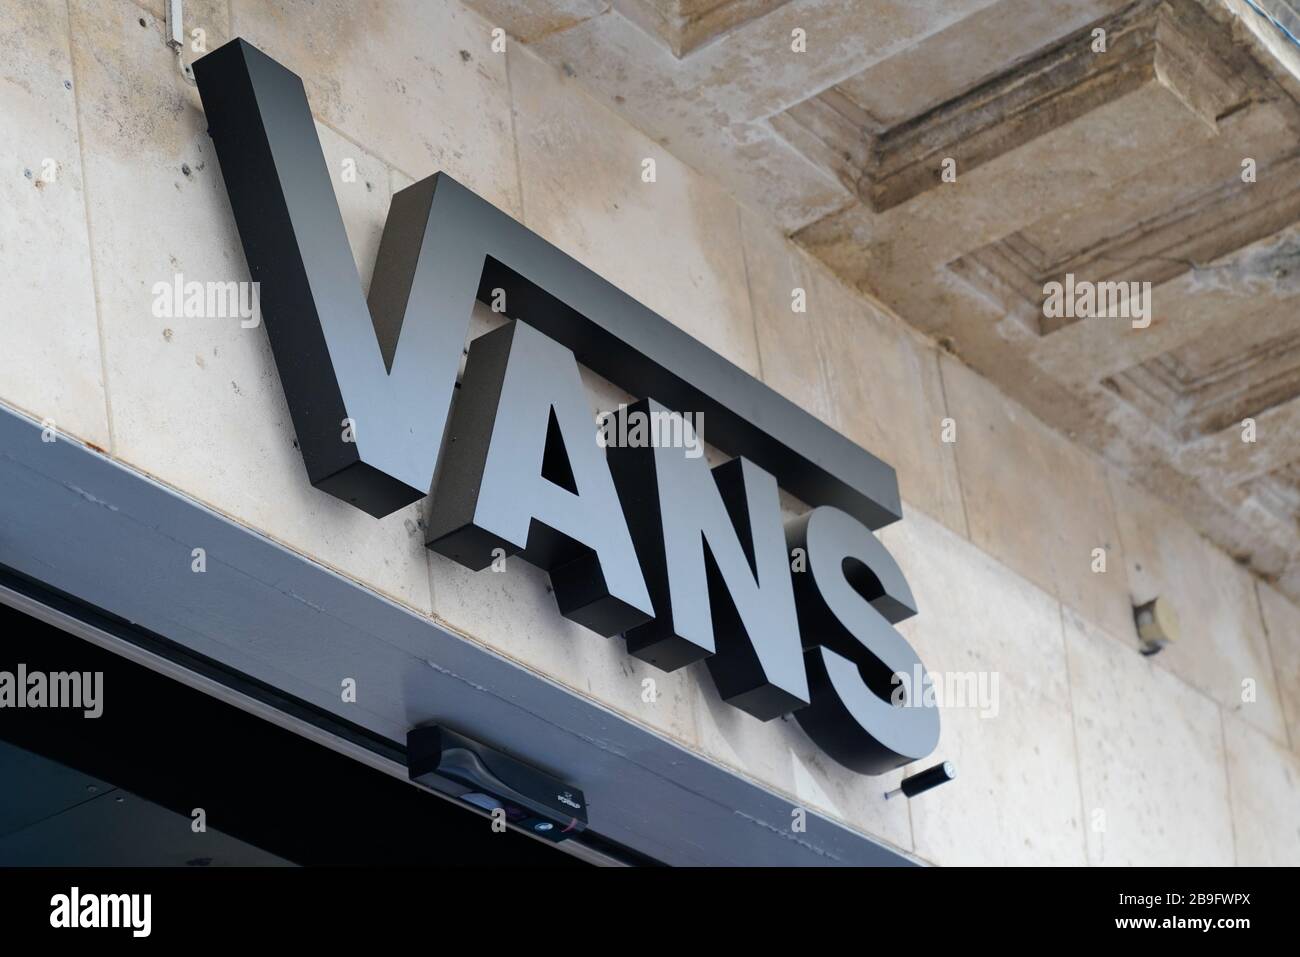 Bordeaux , Aquitaine / France - 10 28 2019 : Vans logo shop sign American  manufacturer store shoes based in California Stock Photo - Alamy